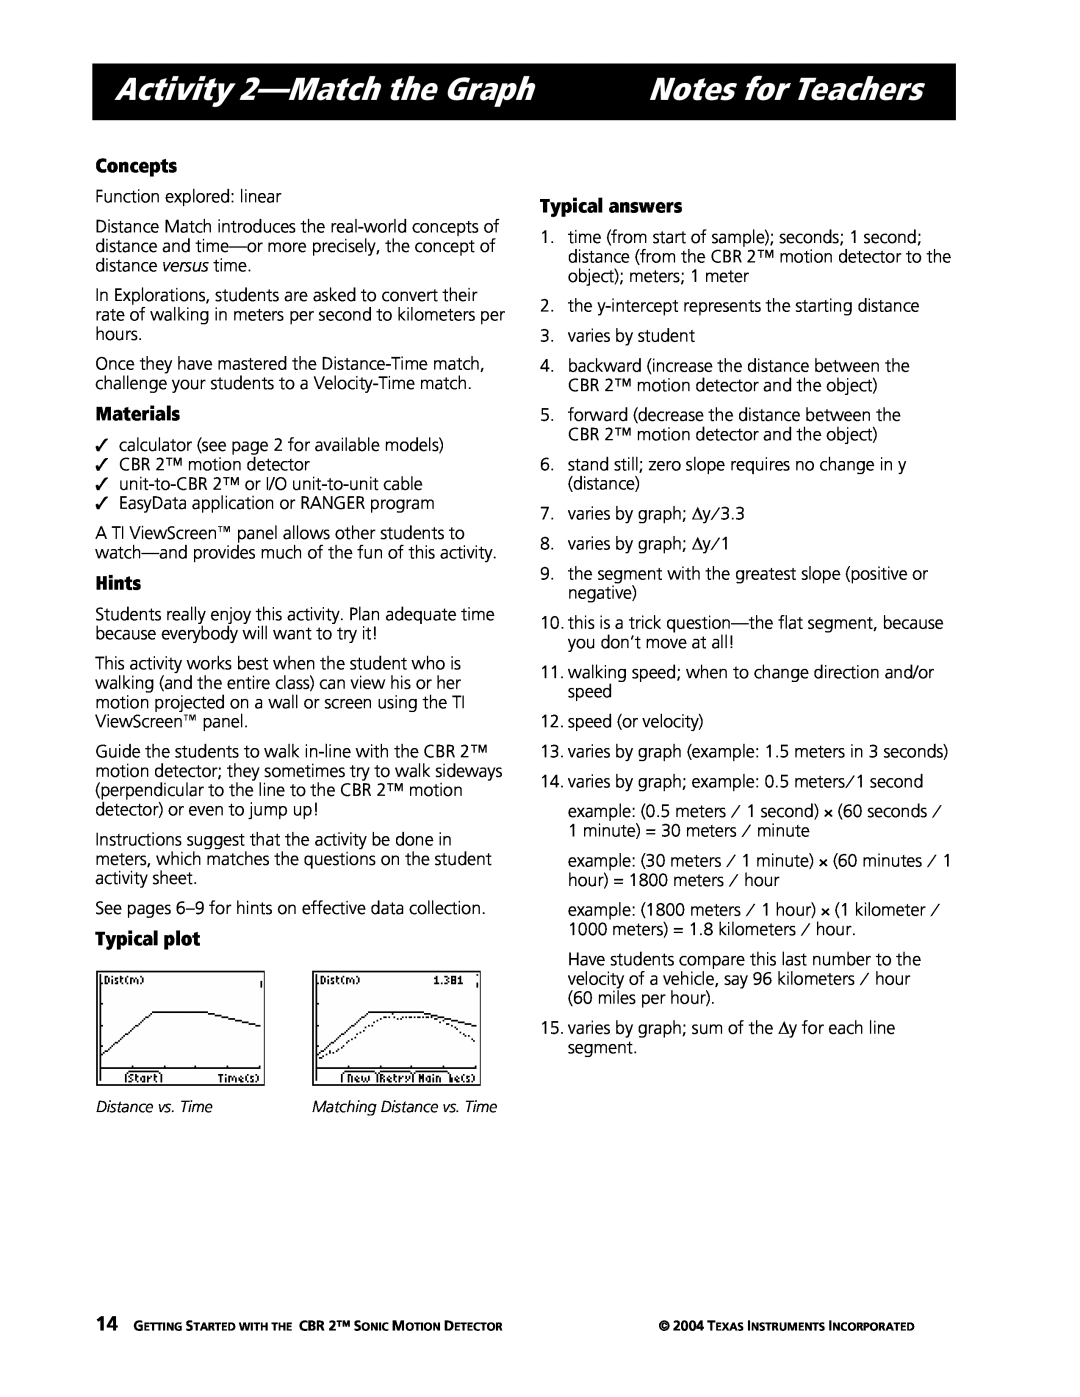 Texas Instruments CBR 2 manual Activity 2-Matchthe Graph, Notes for Teachers, Concepts, Materials, Hints, Typical plot 